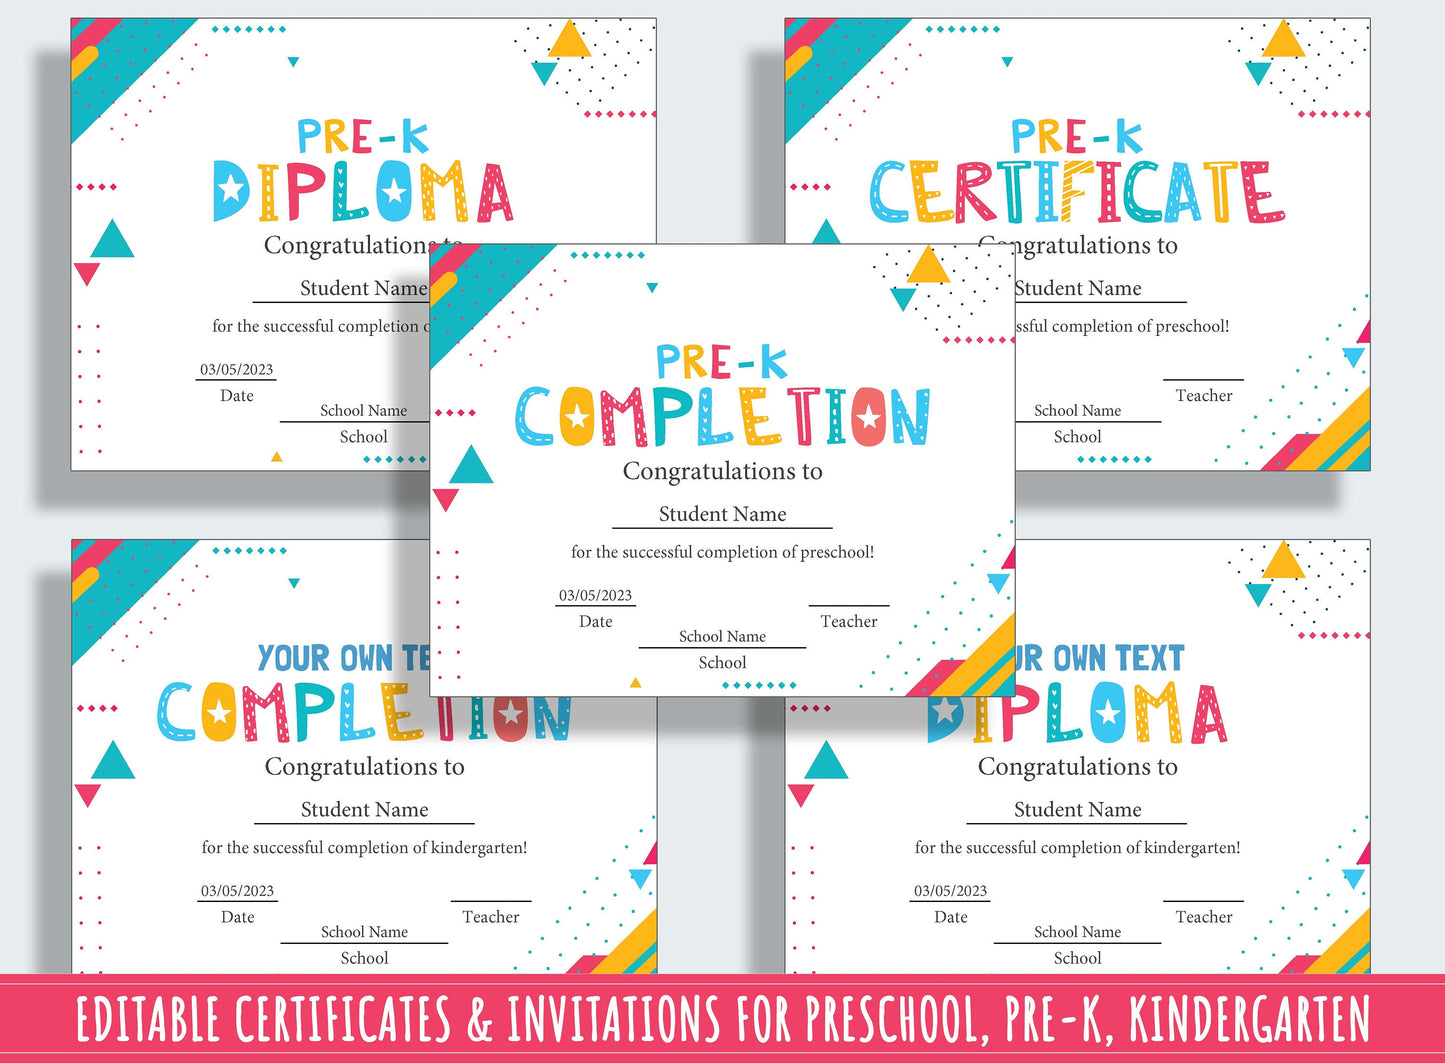 Modern-Themed Preschool and Kindergarten End-of-Year Celebration Kit: 37 Editable Pages for Certificates, Diplomas, and Invitations